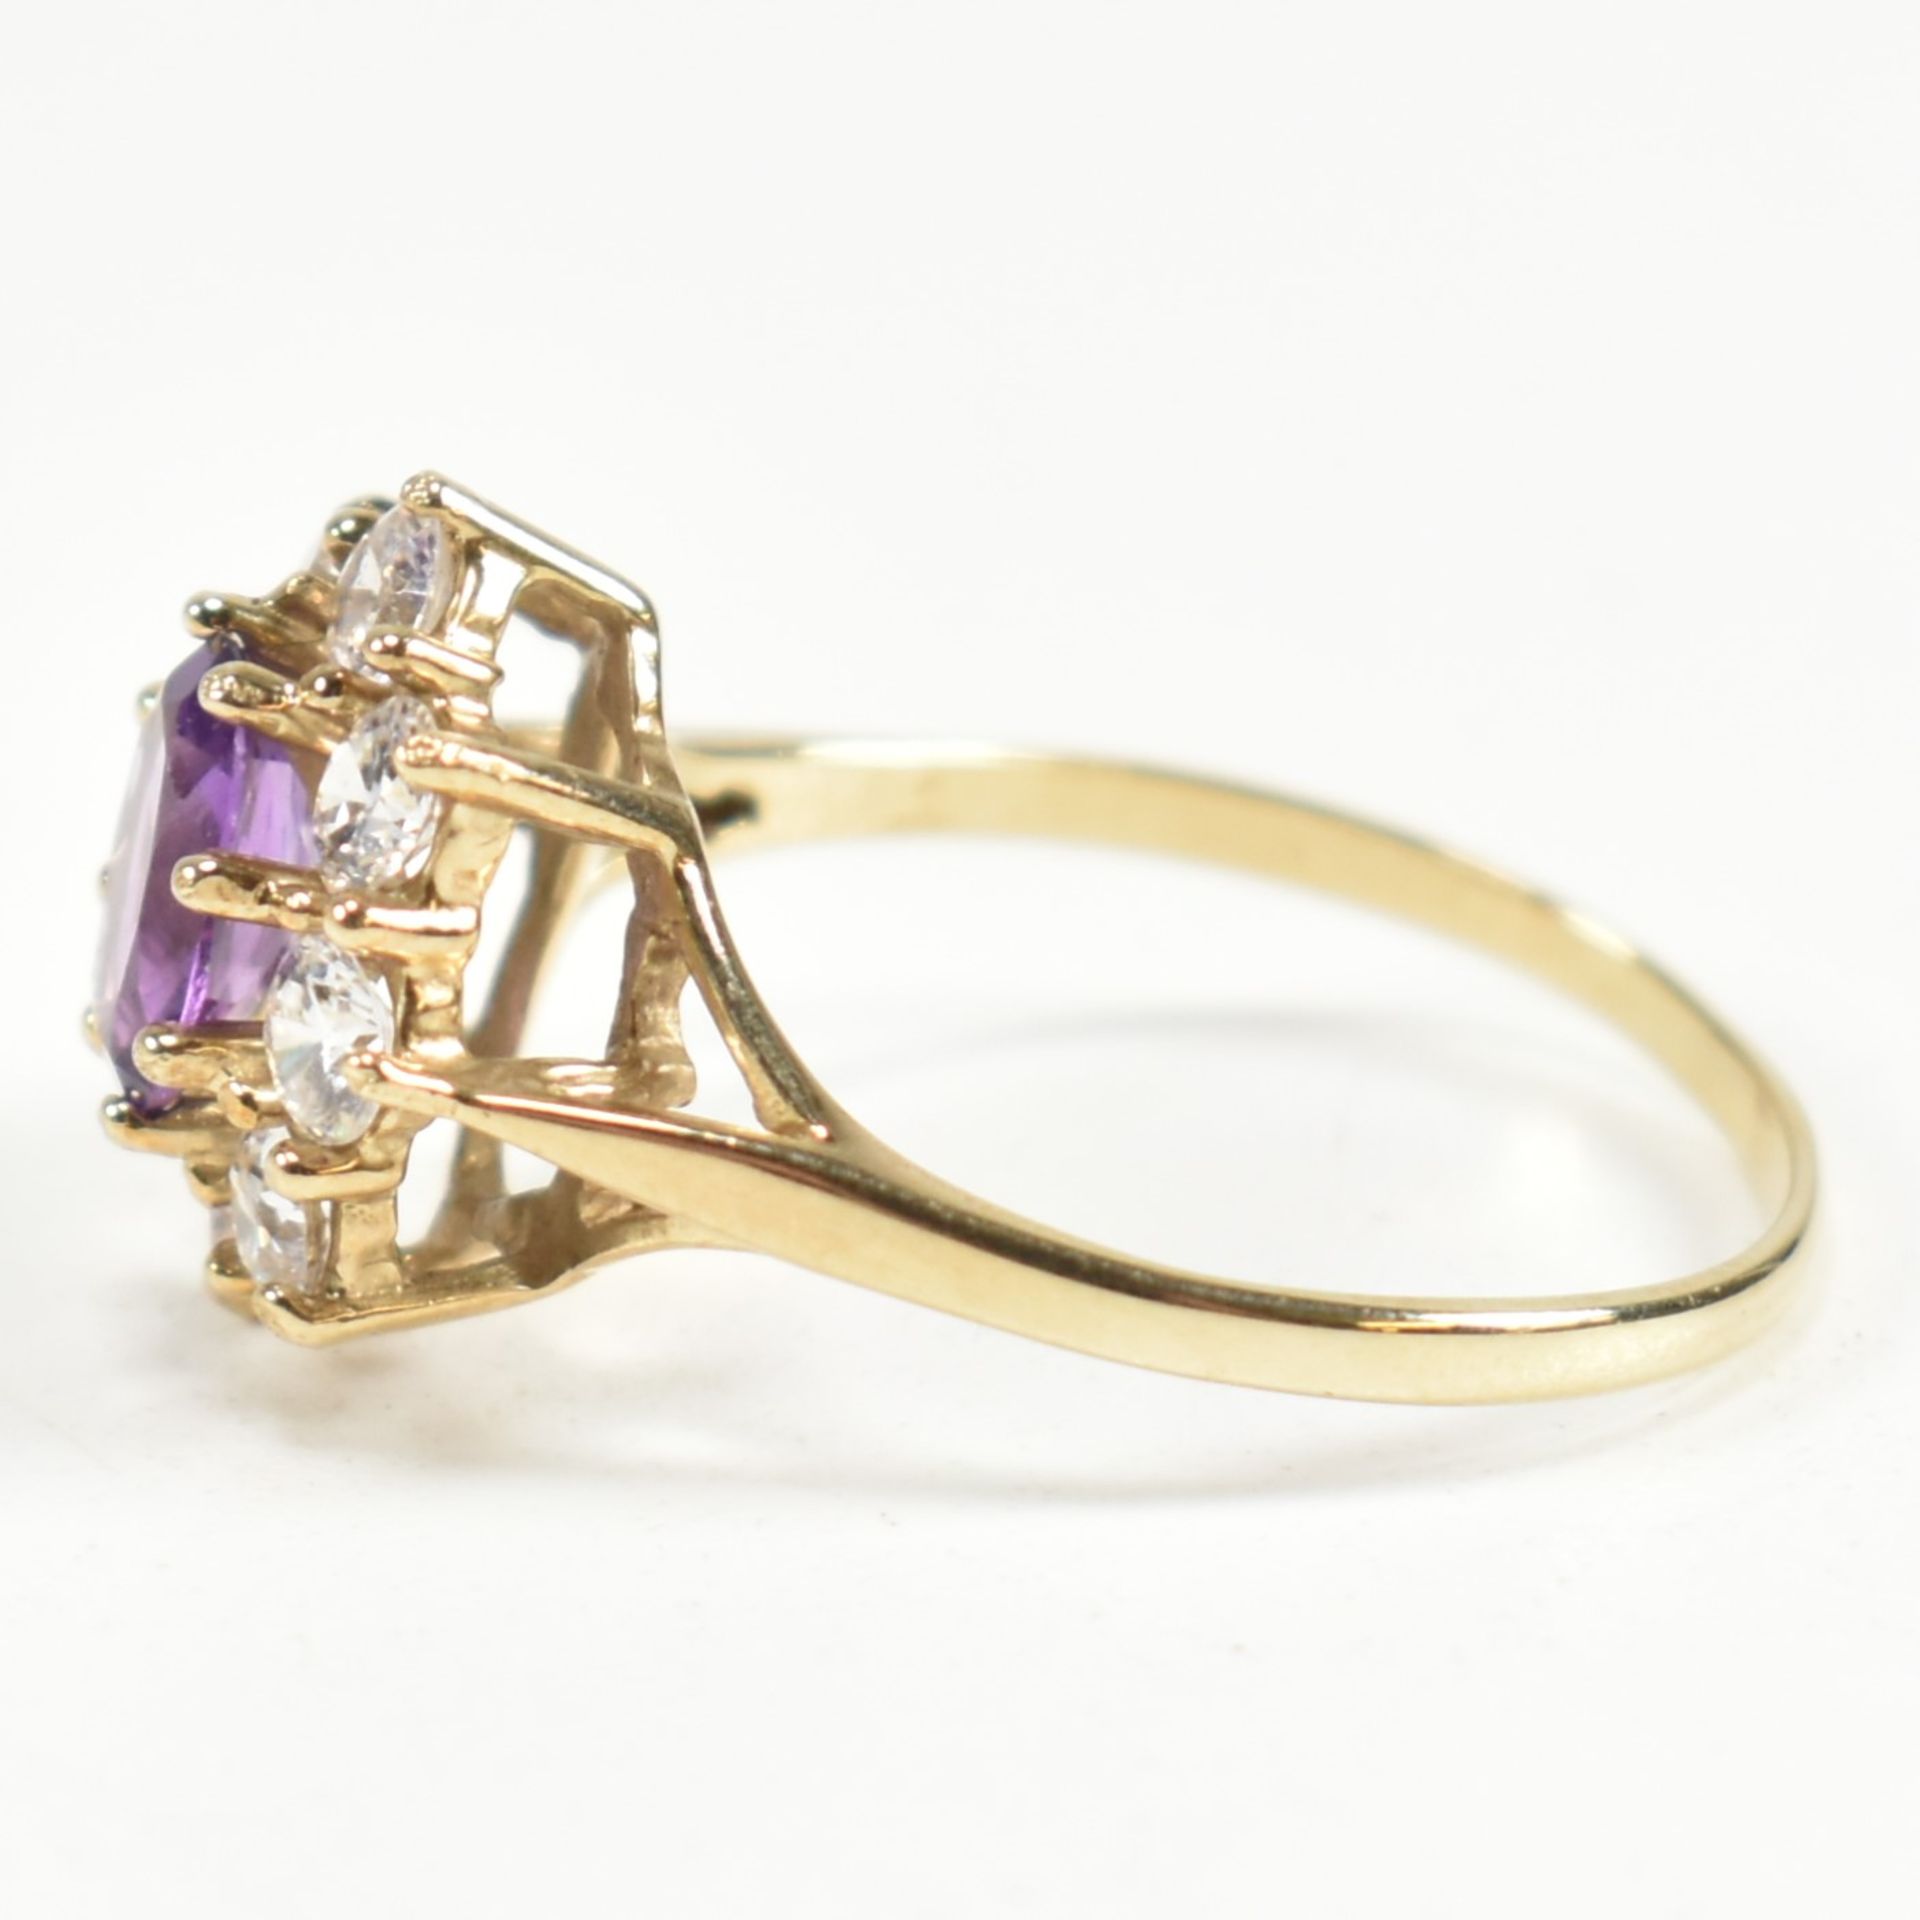 HALLMARKED 9CT GOLD AMETHYST & WHITE STONE CLUSTER RING - Image 7 of 9